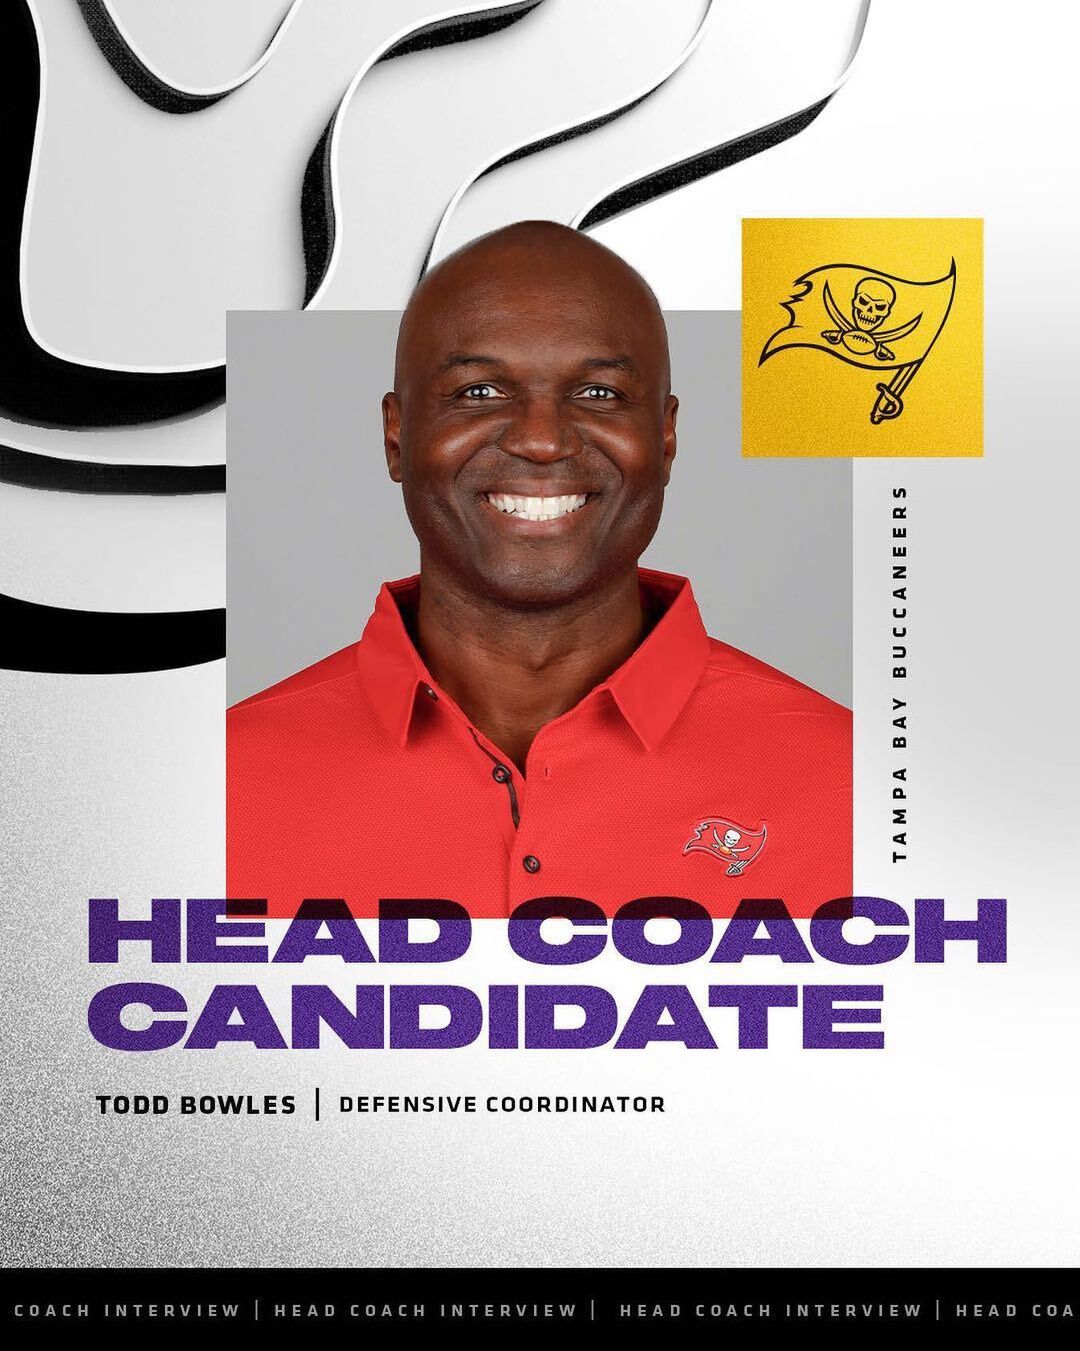 We have completed an interview with Buccaneers Defensive Coordinator Todd Bowles...